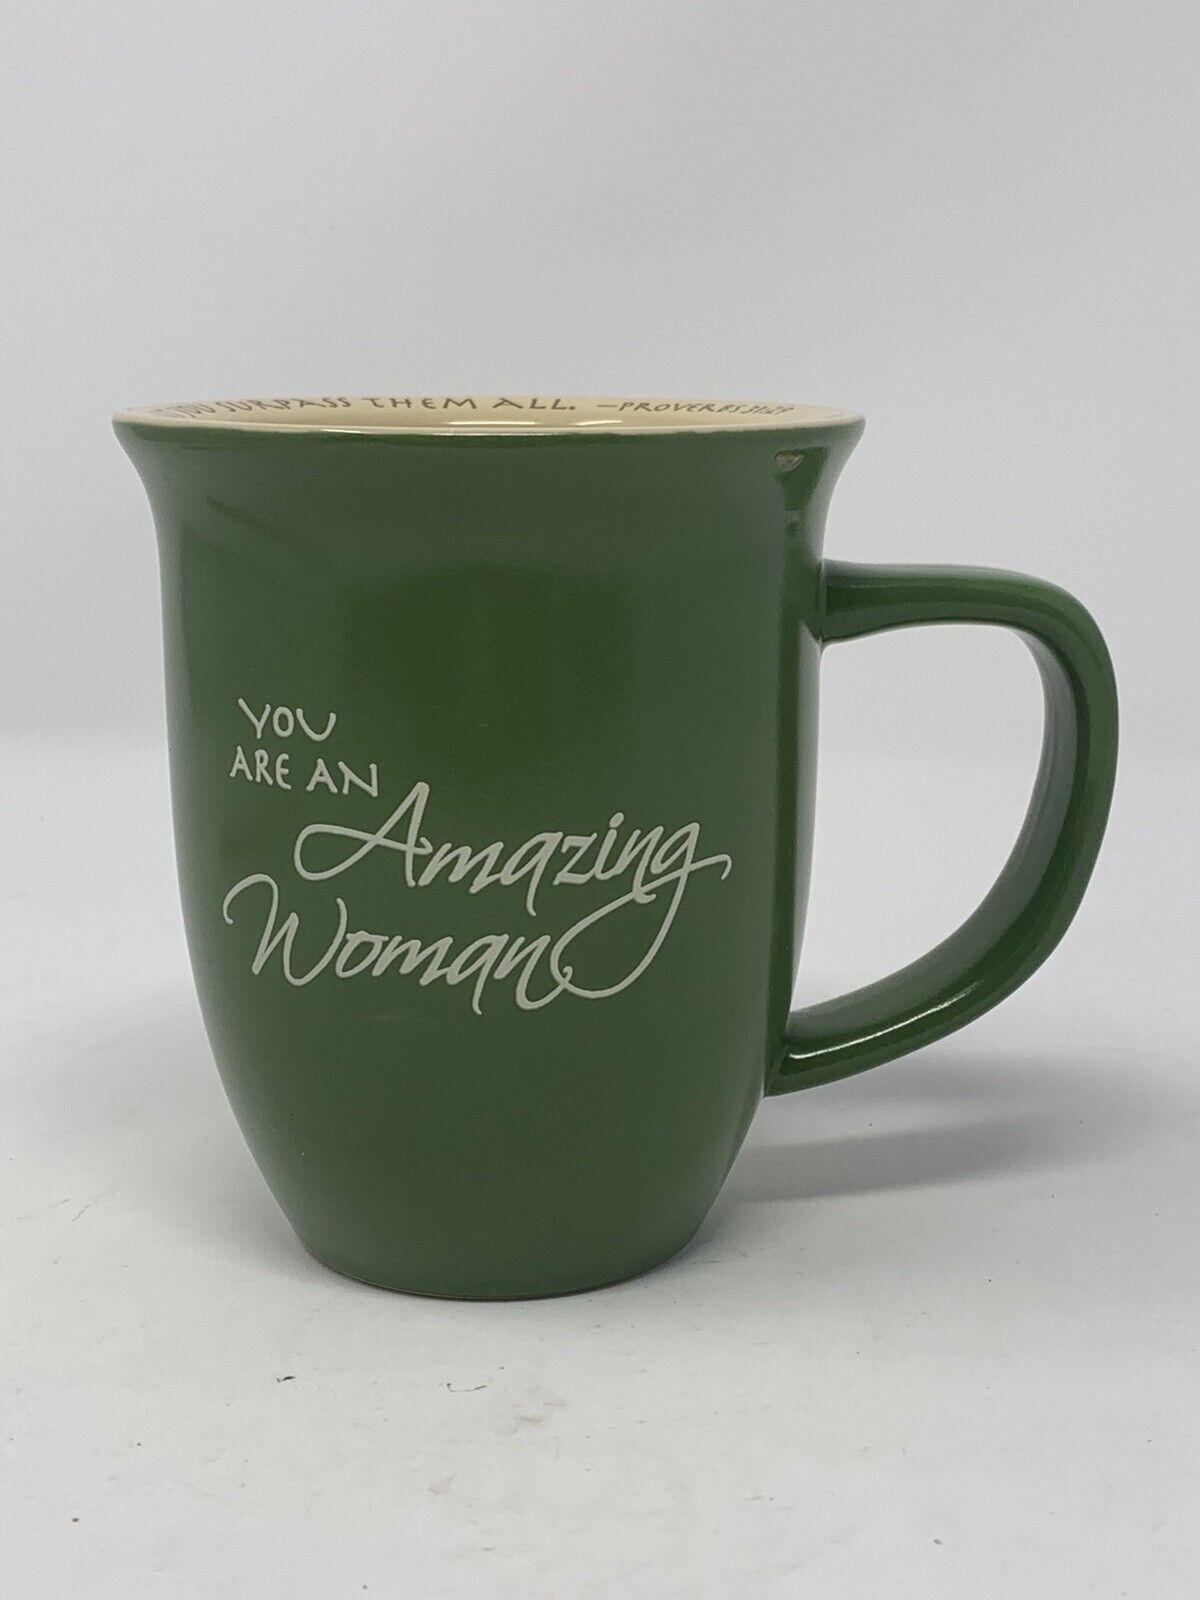 You are An Amazing Woman Mug Cup Proverbs 31:29 Green Tan Abbey Press